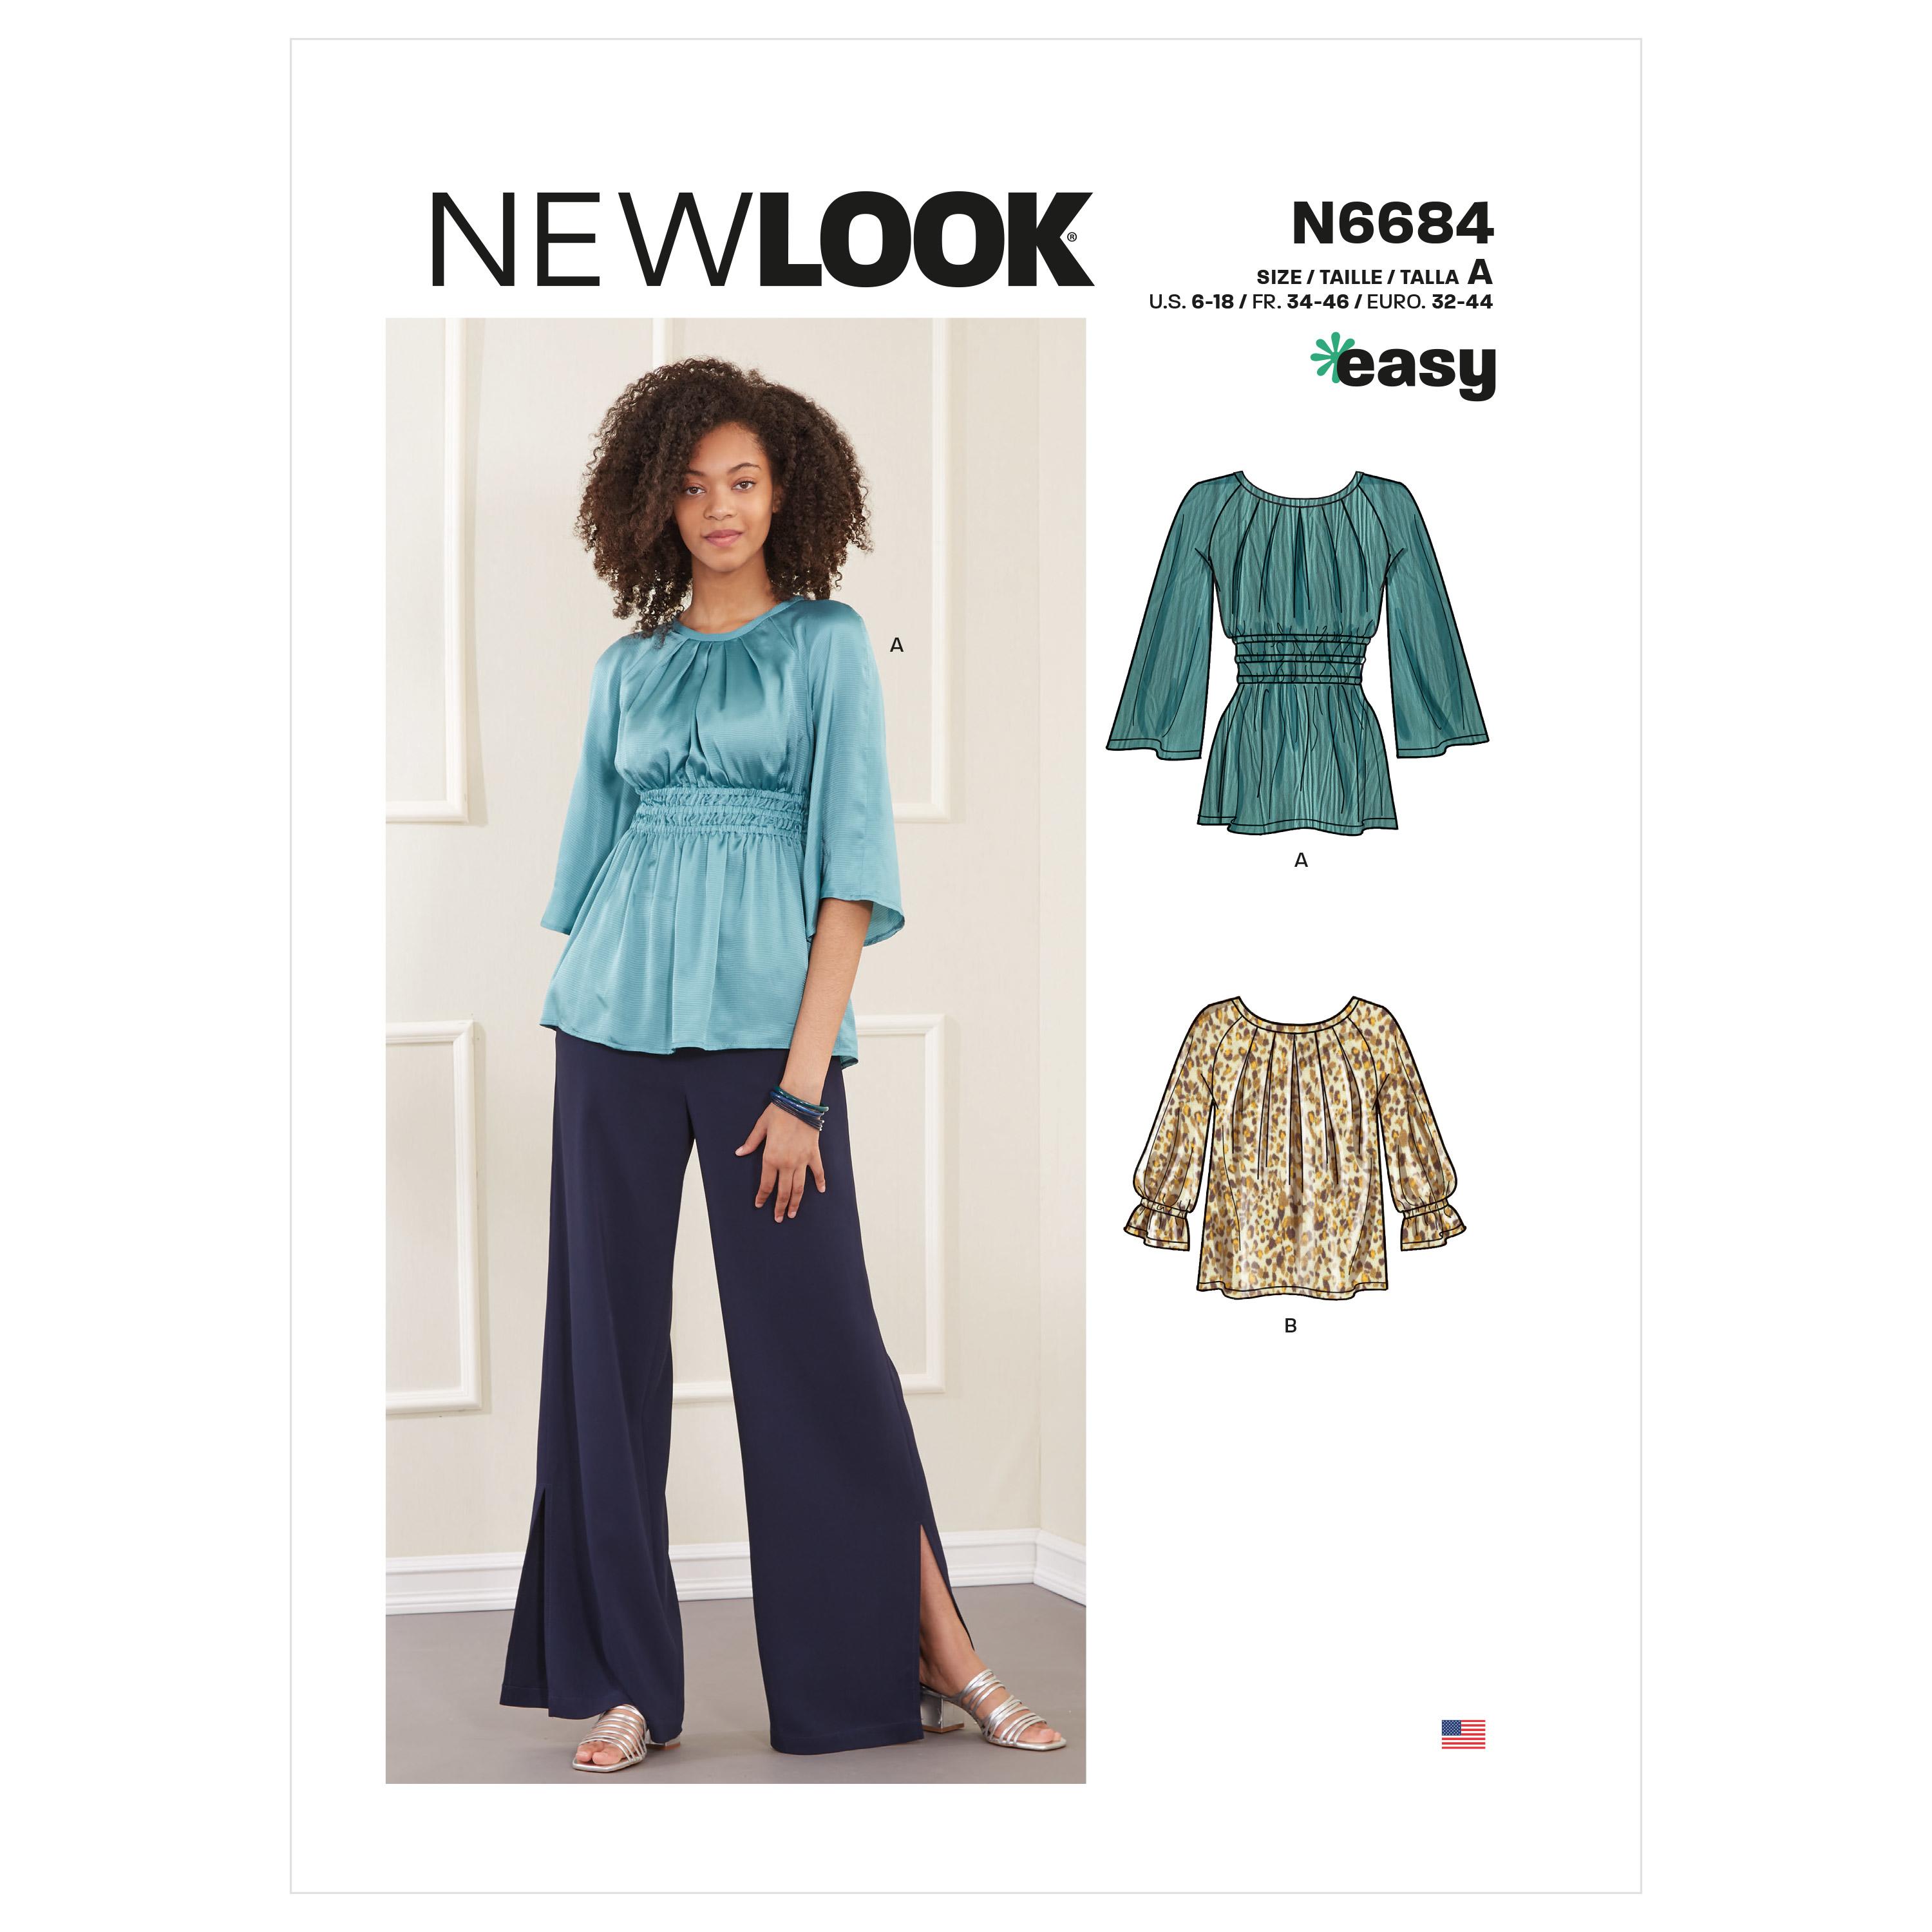 New Look Sewing Pattern N6684 Misses' Tops In Two Lengths